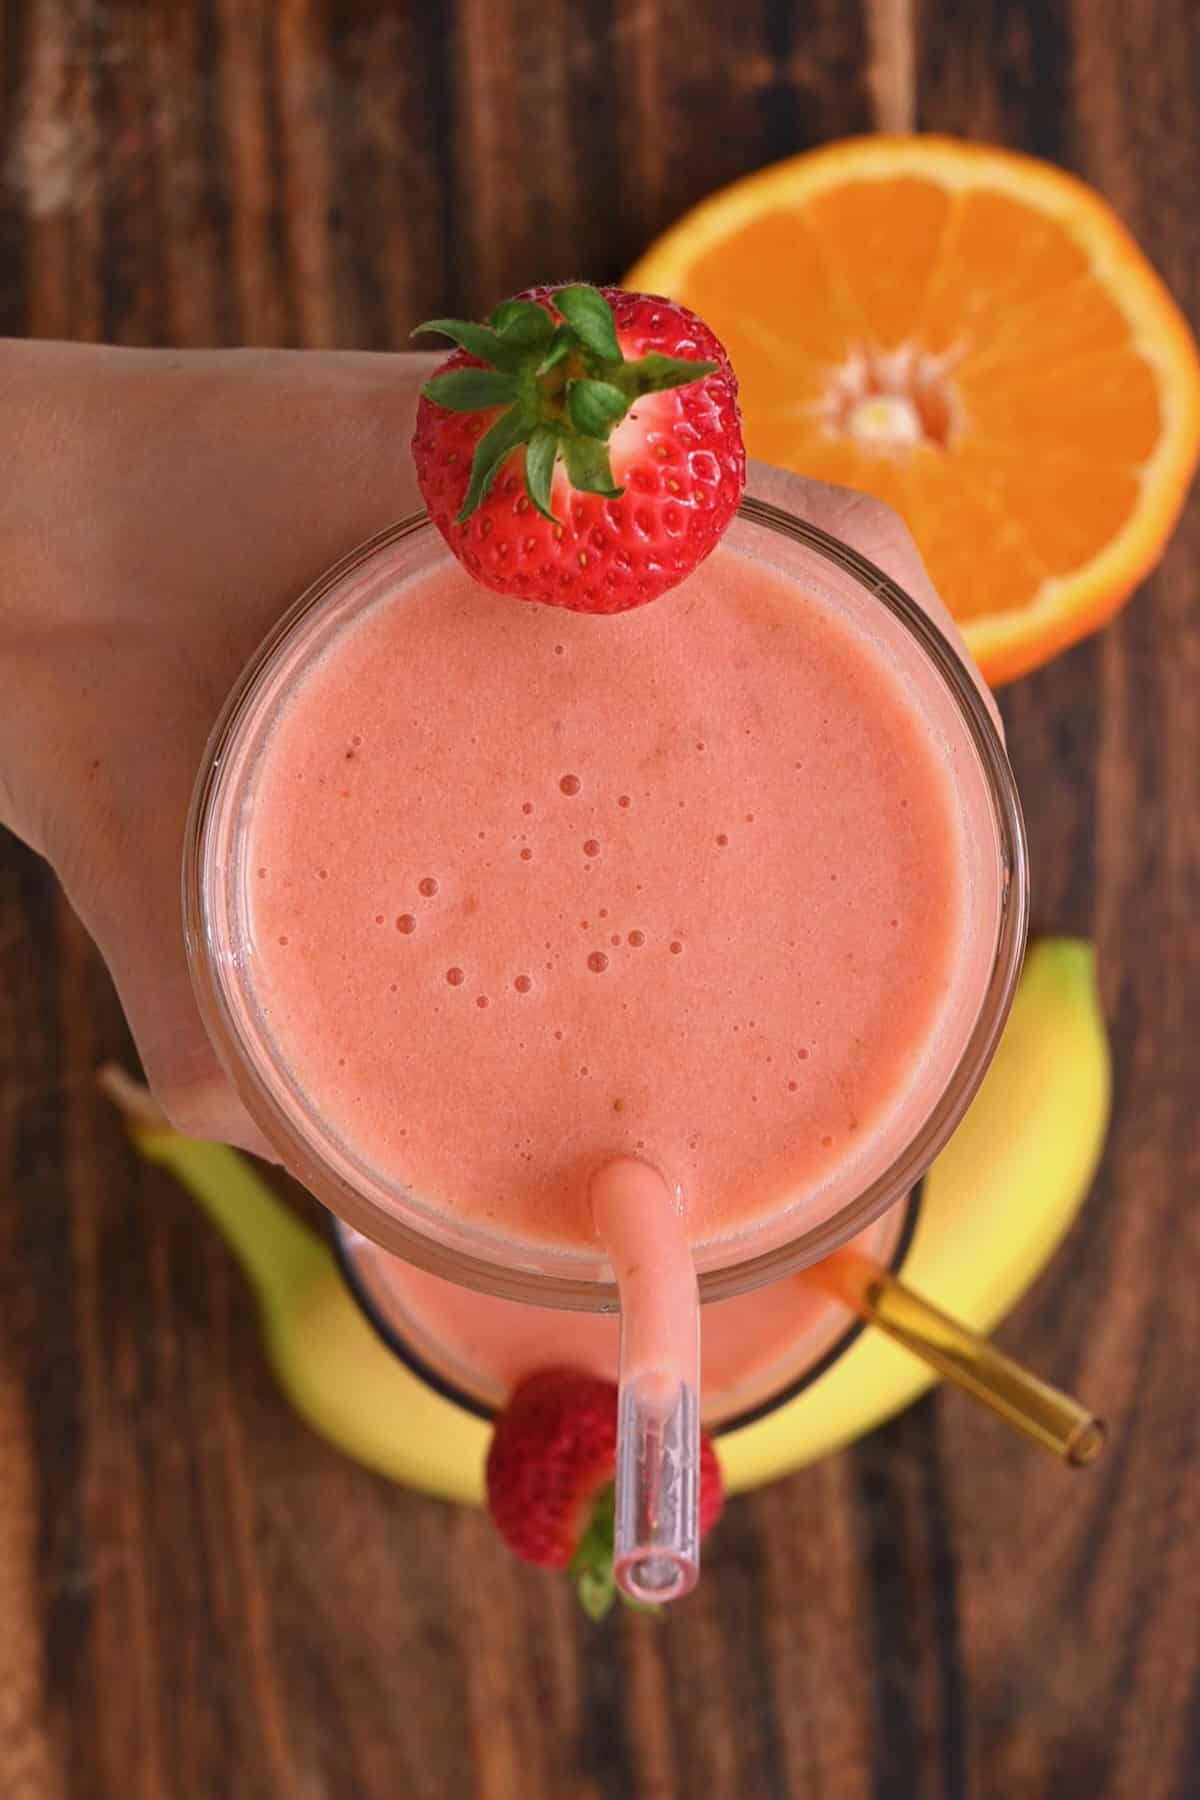 Top view of a glass with smoothie topped with a strawberry